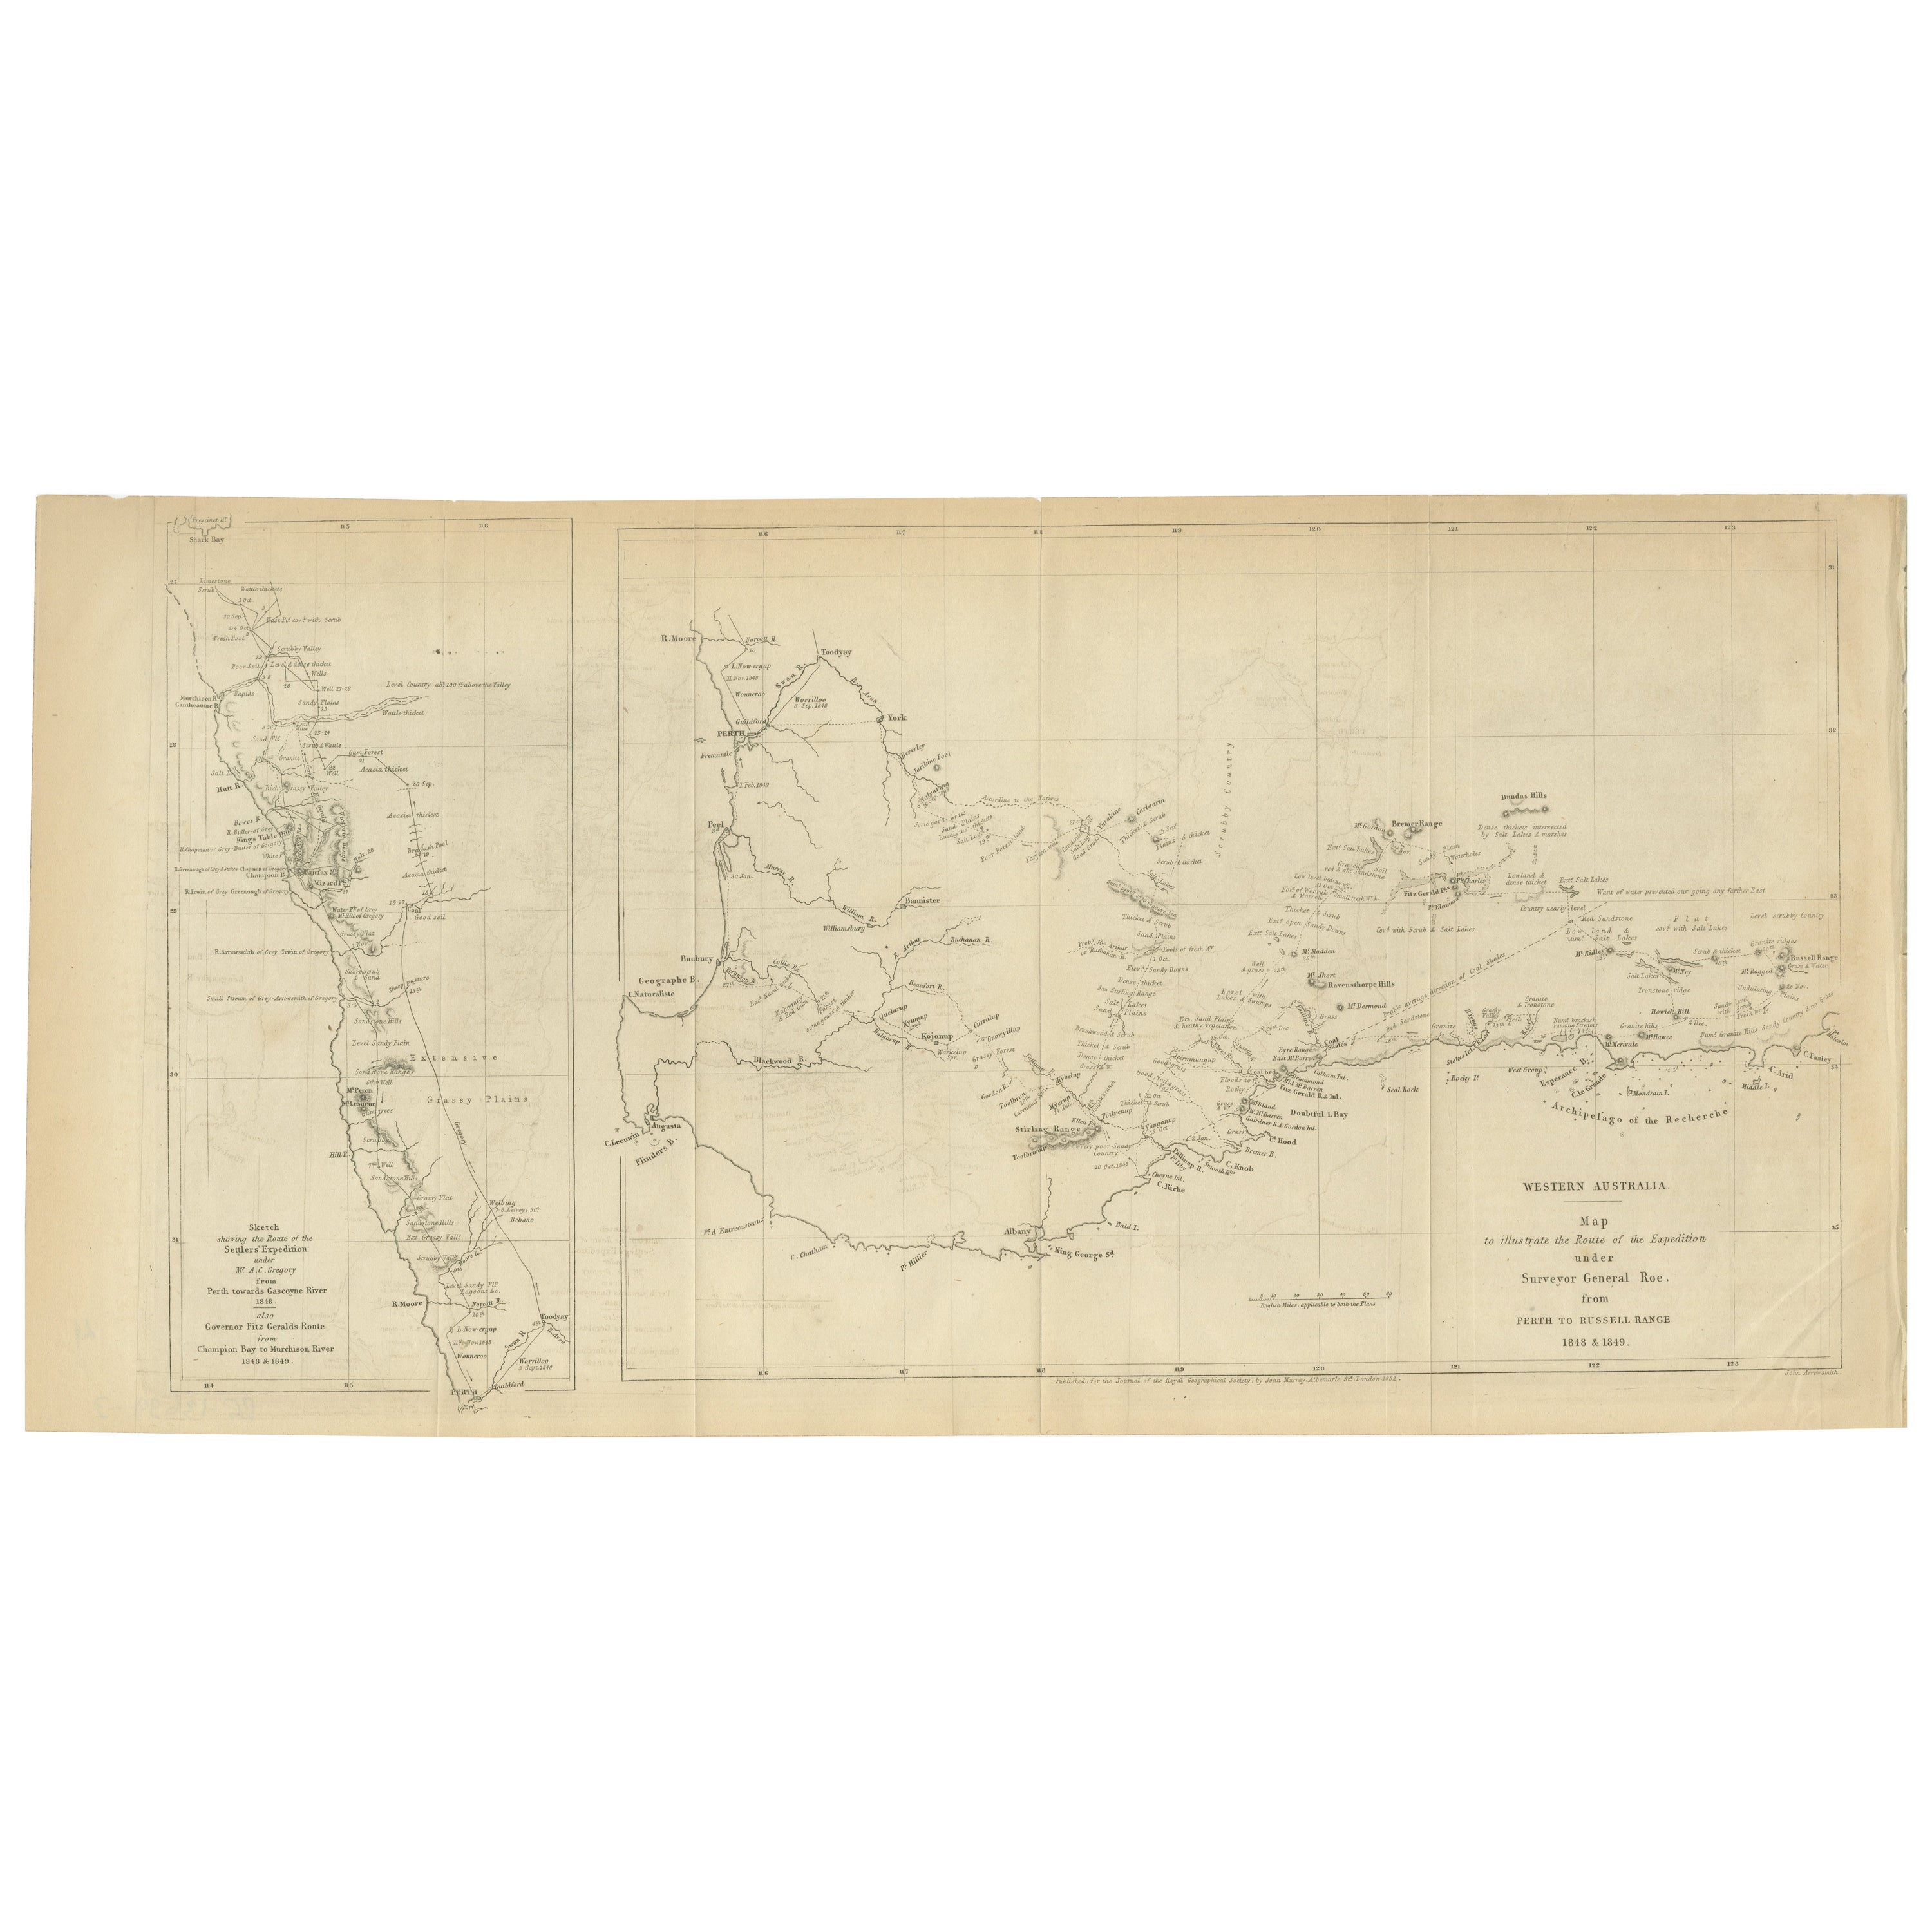 Charting the West: Surveyor General Roe’s Western Australian Expedition , 1852